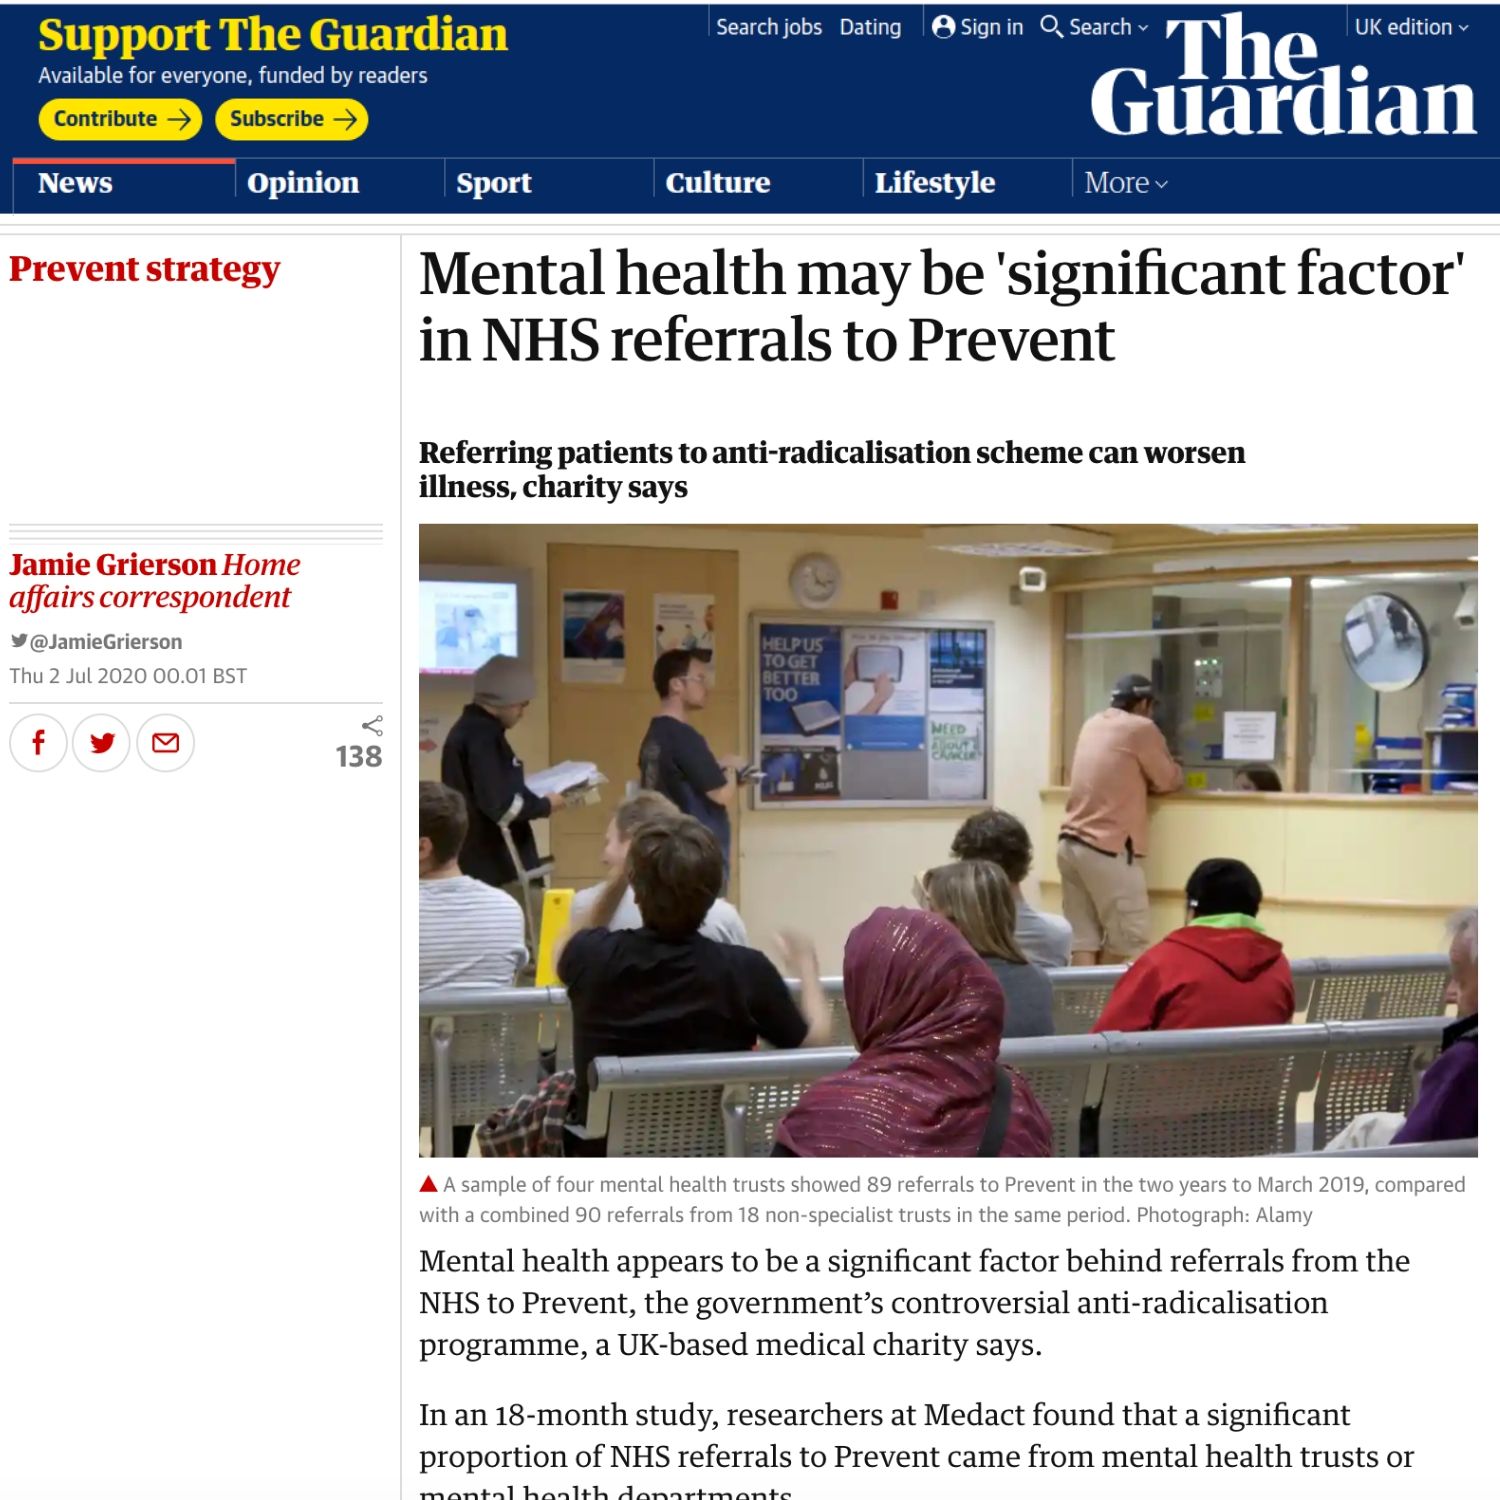 Mental health may be ‘significant factor’ in NHS referrals to Prevent